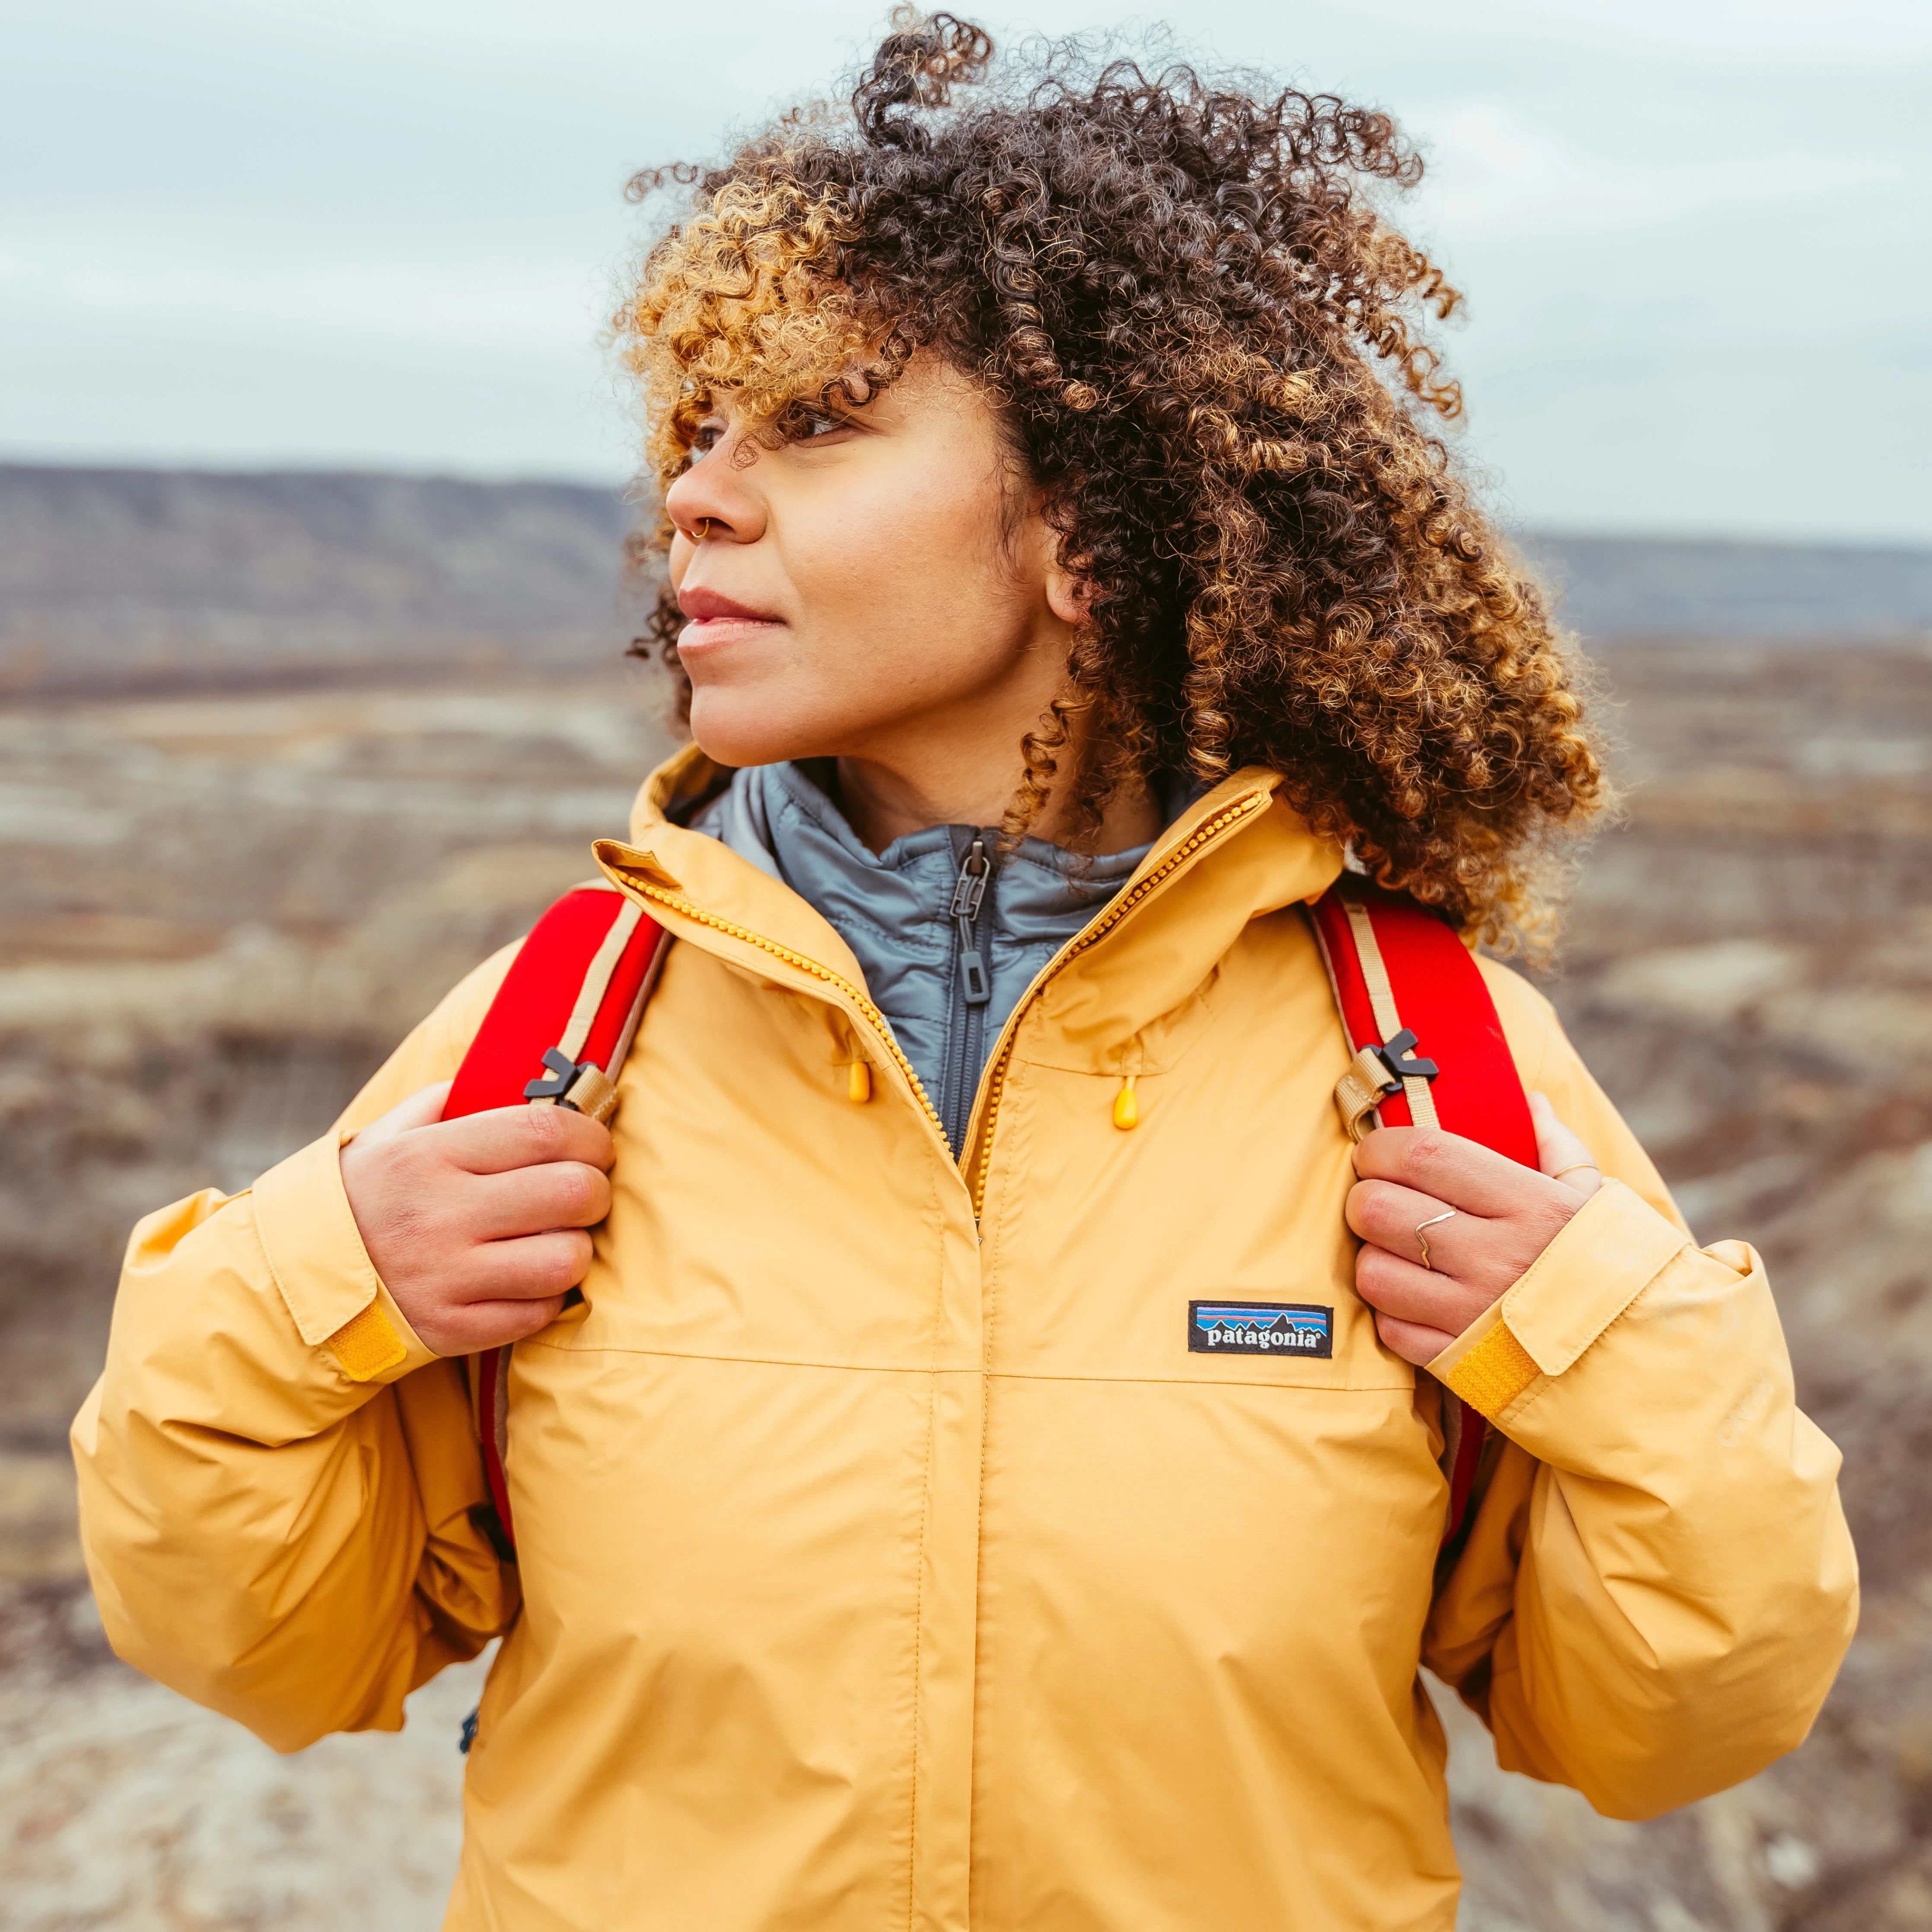 Patagonia Women's – Elements Outfitters